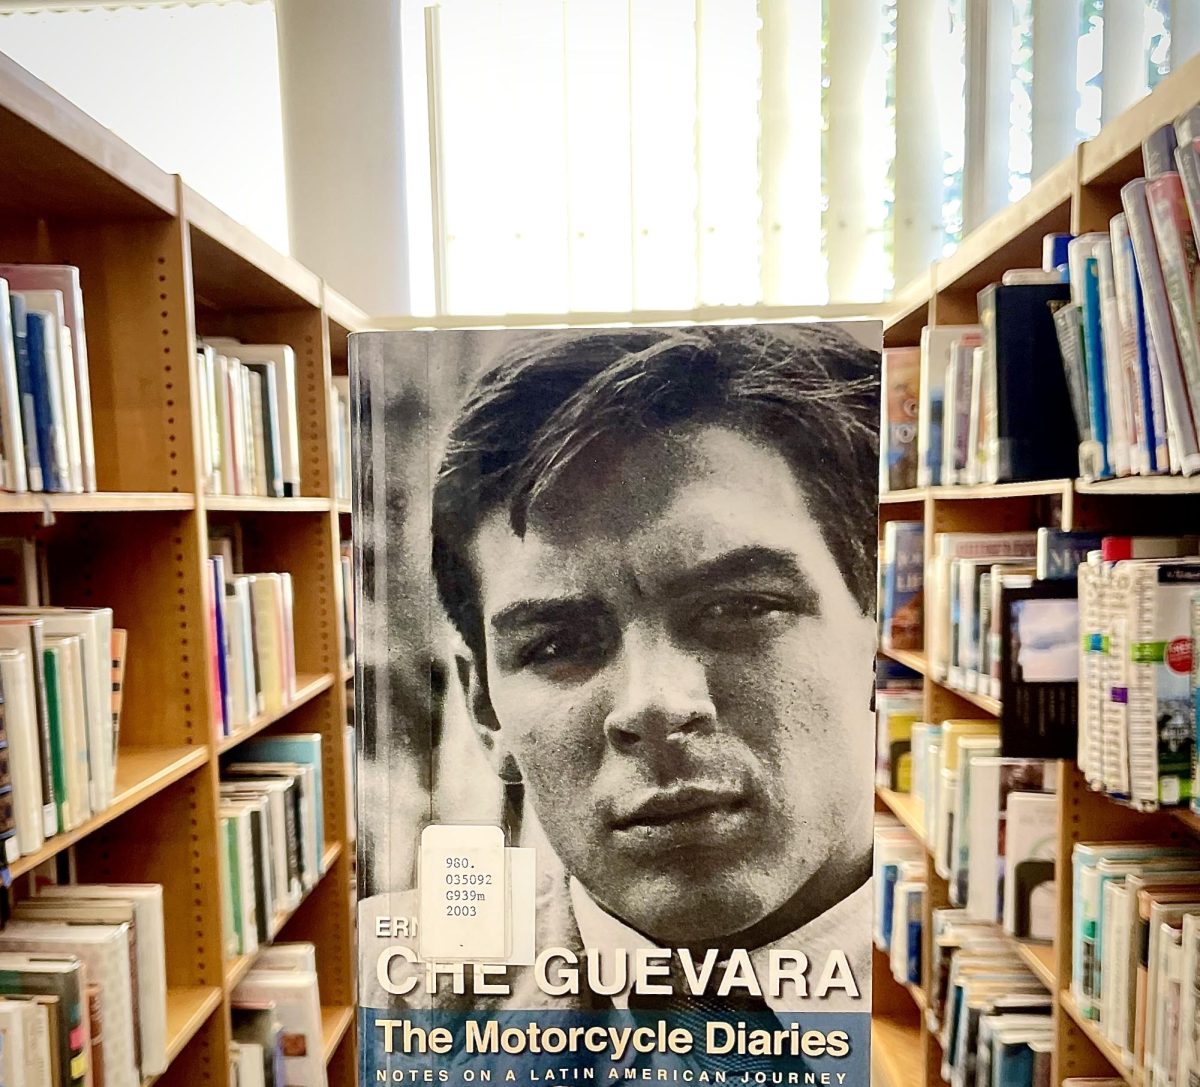 A+library+copy+of+The+Motorcycle+Diaries%2C+by+Ernesto+%28Che%29+Guevara%2C+held+up+between+rows+of+books%2C+on+March+3+inside+of+E.P.+Foster+Library+in+Ventura%2C+Calif.